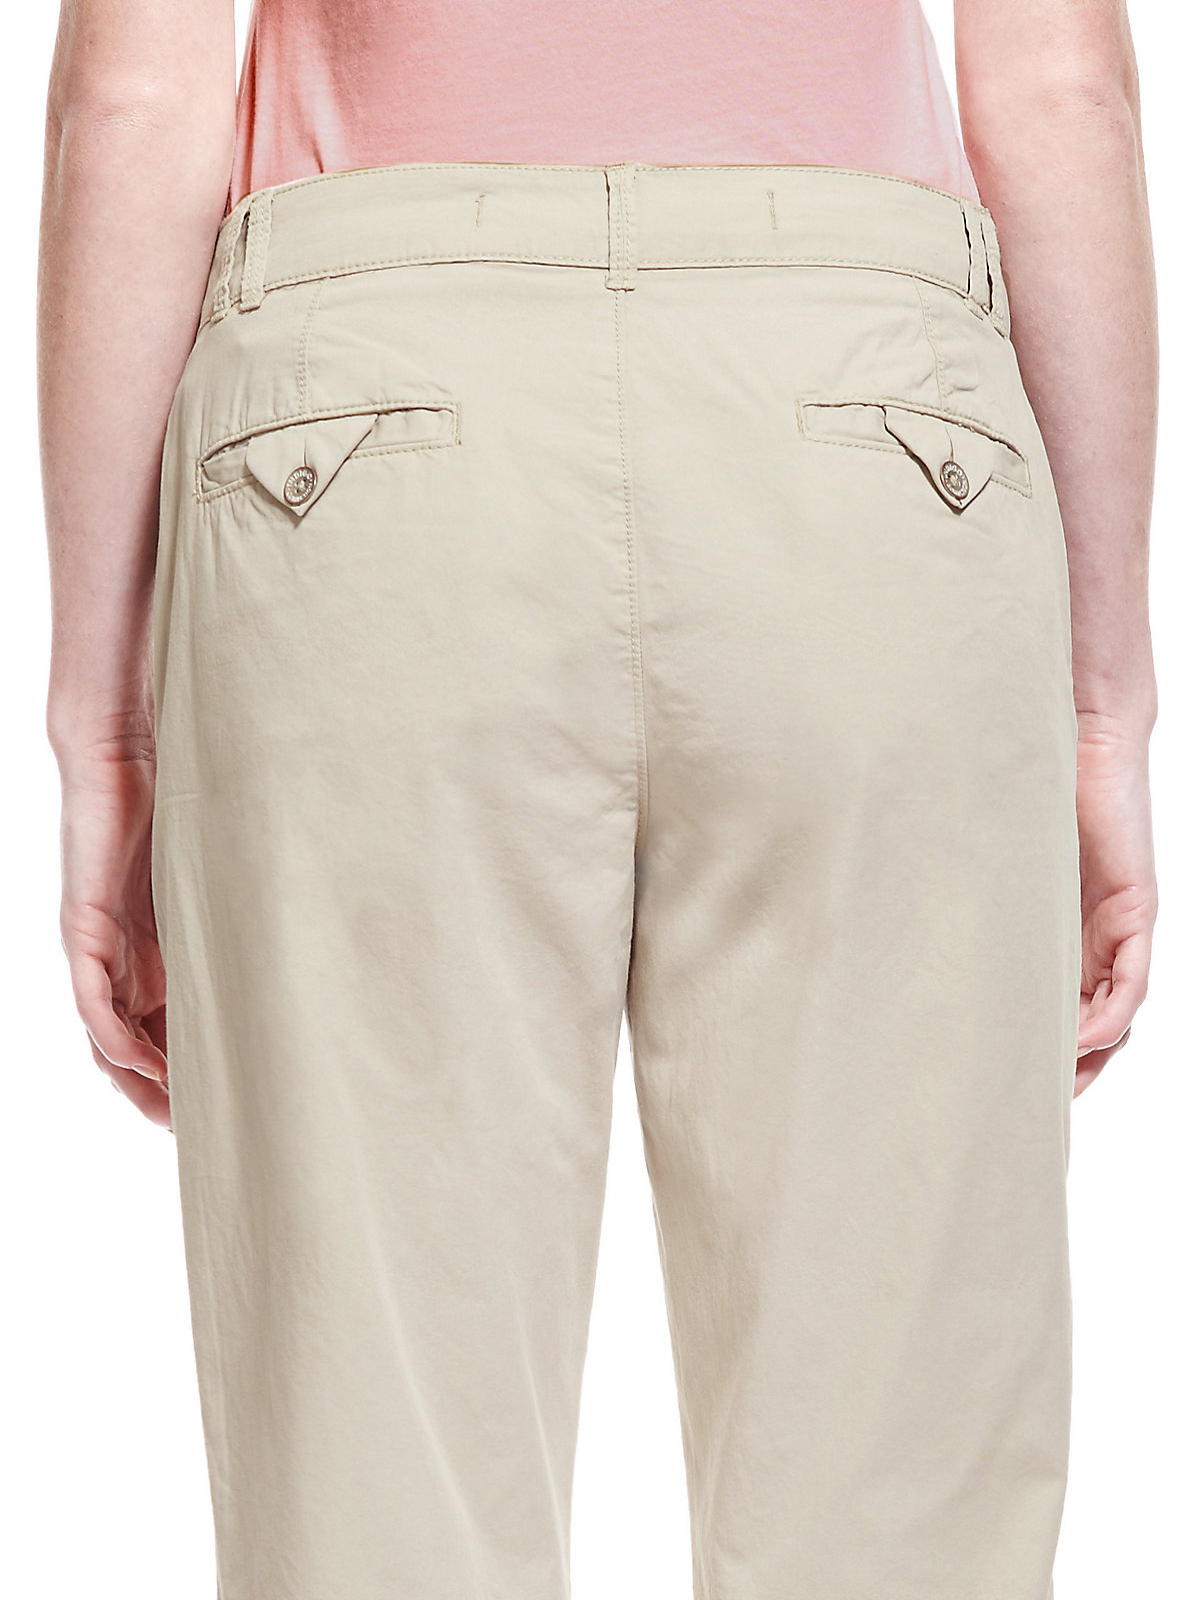 Marks and Spencer - - M&5 NEUTRAL Pure Cotton Straight Leg Chinos ...